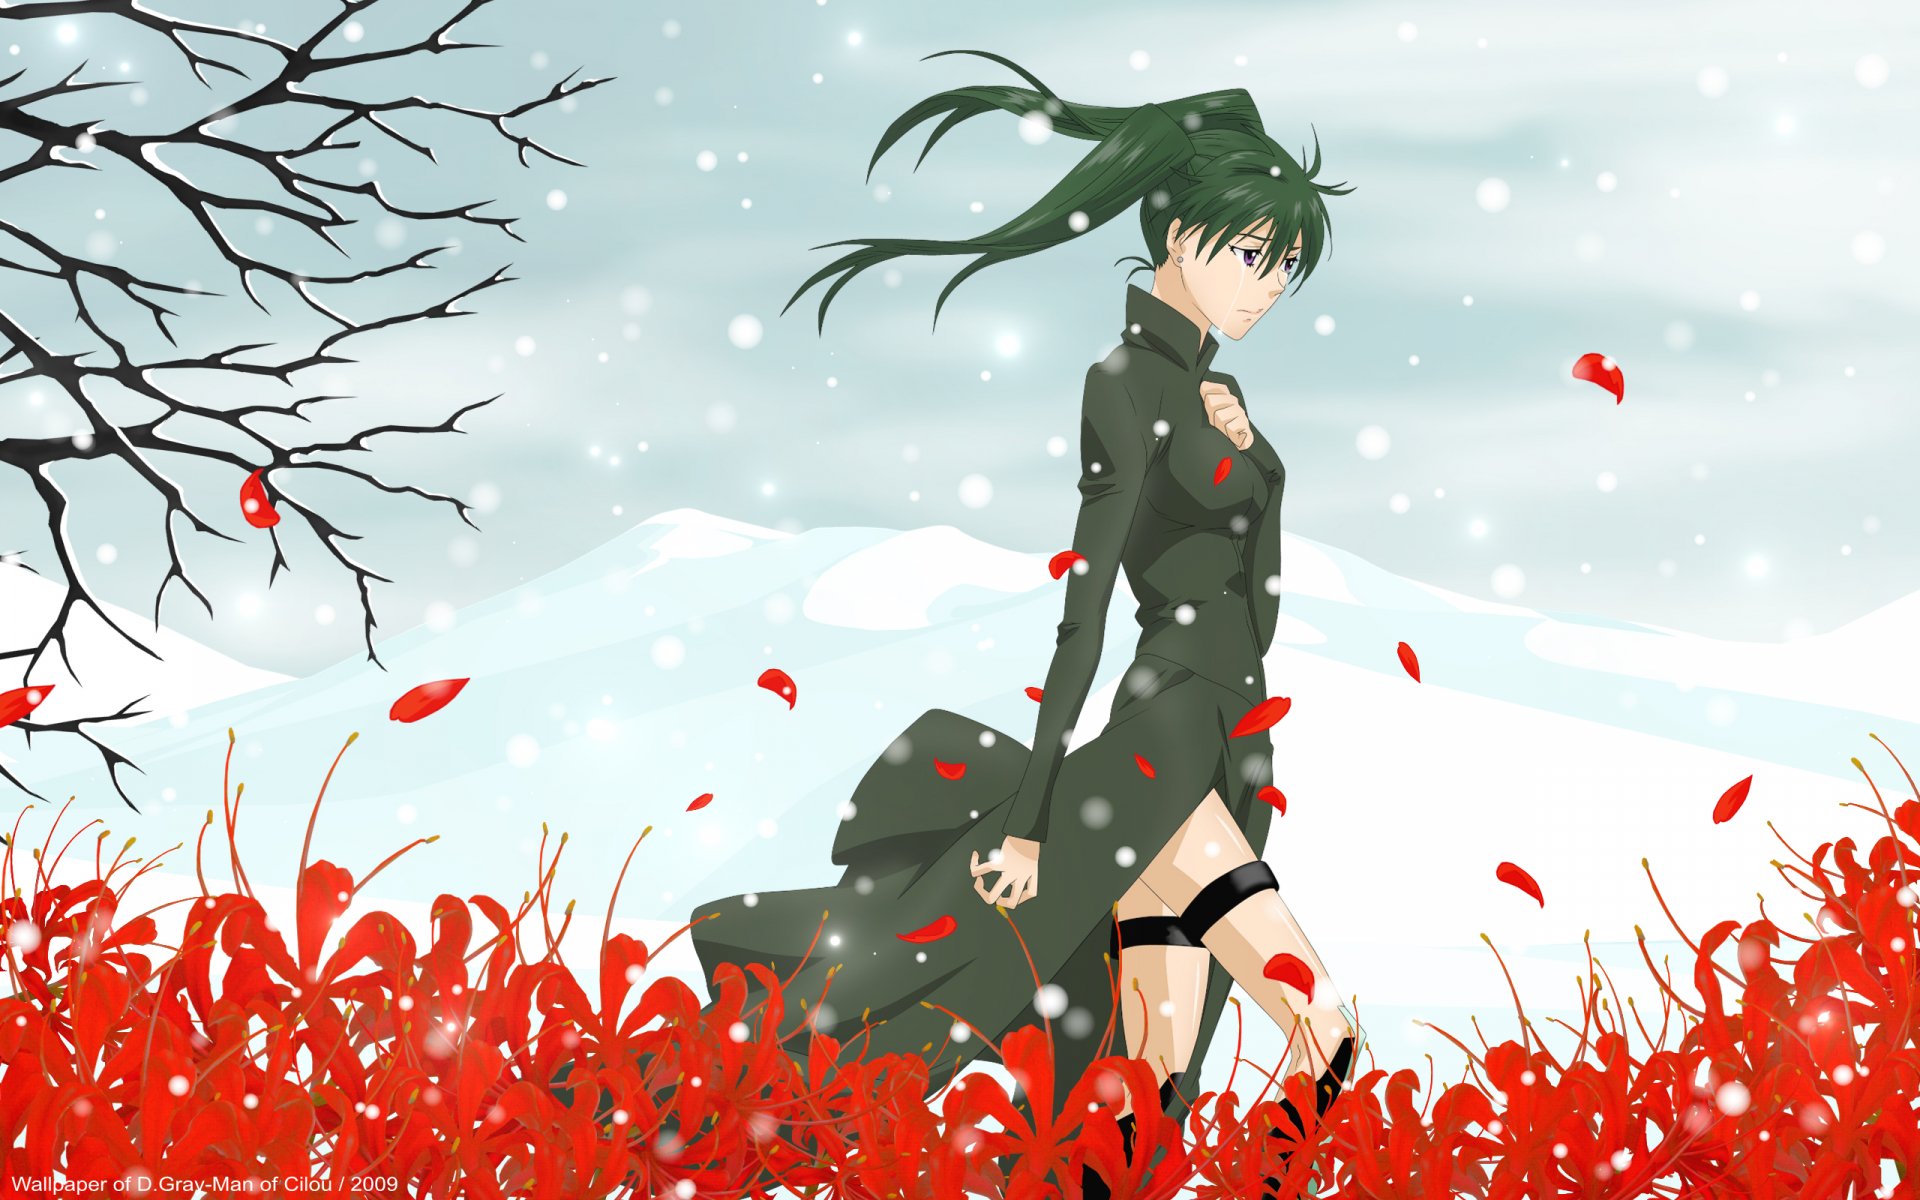 download 1536x2048 sadness, anime girl, sad expression on anime red and gray wallpapers